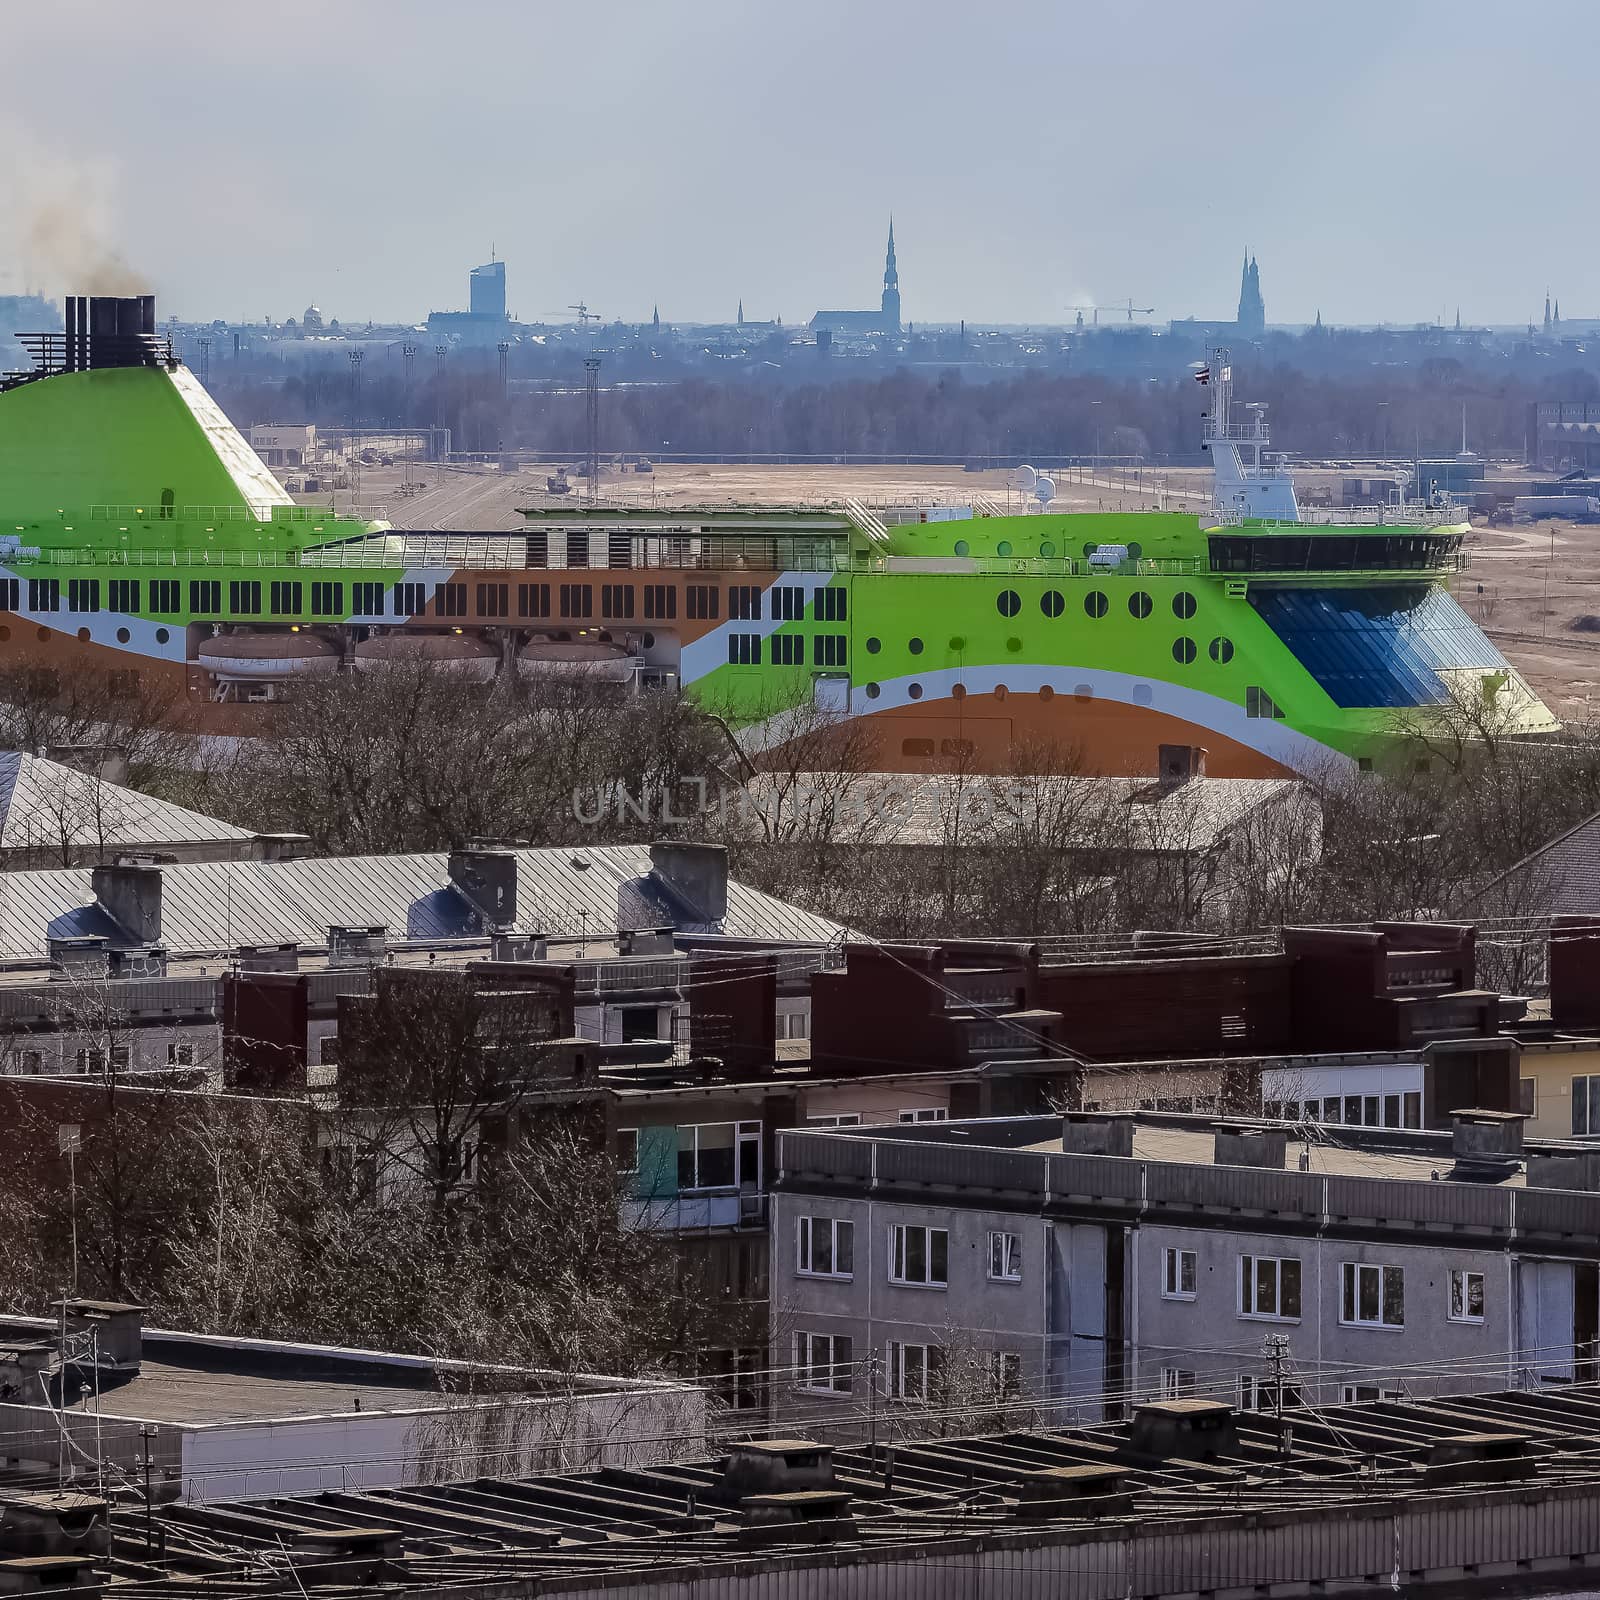 Green cruise liner. Passenger ferry sailing past the Riga city